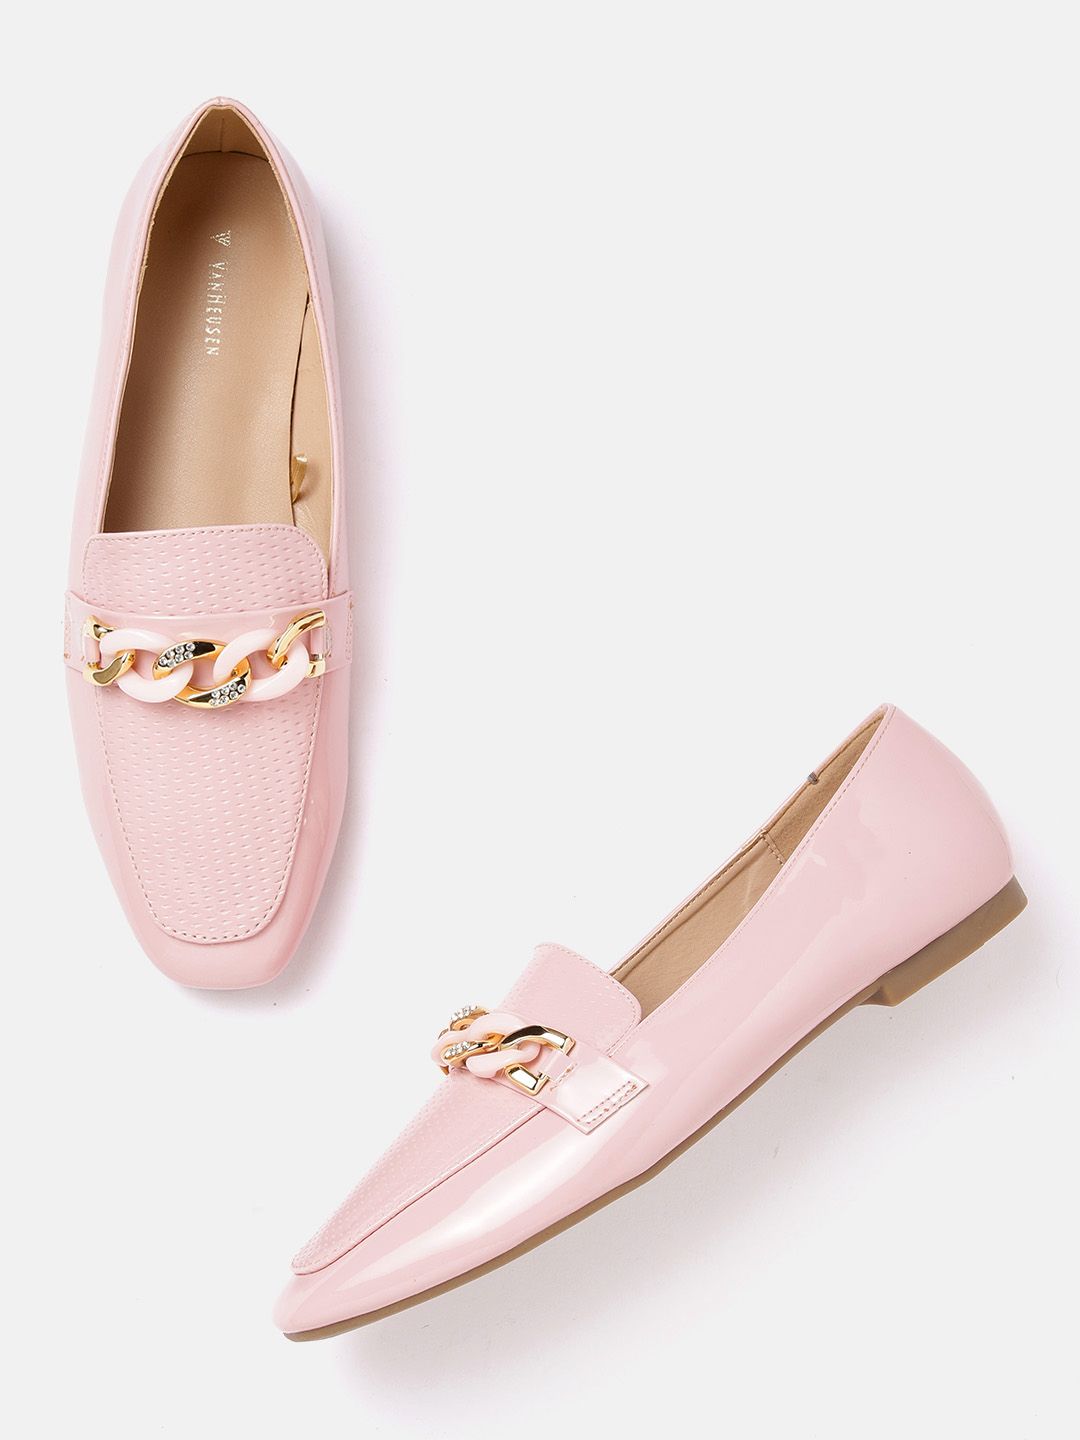 Van Heusen Woman Loafers With Chain Detail Price in India